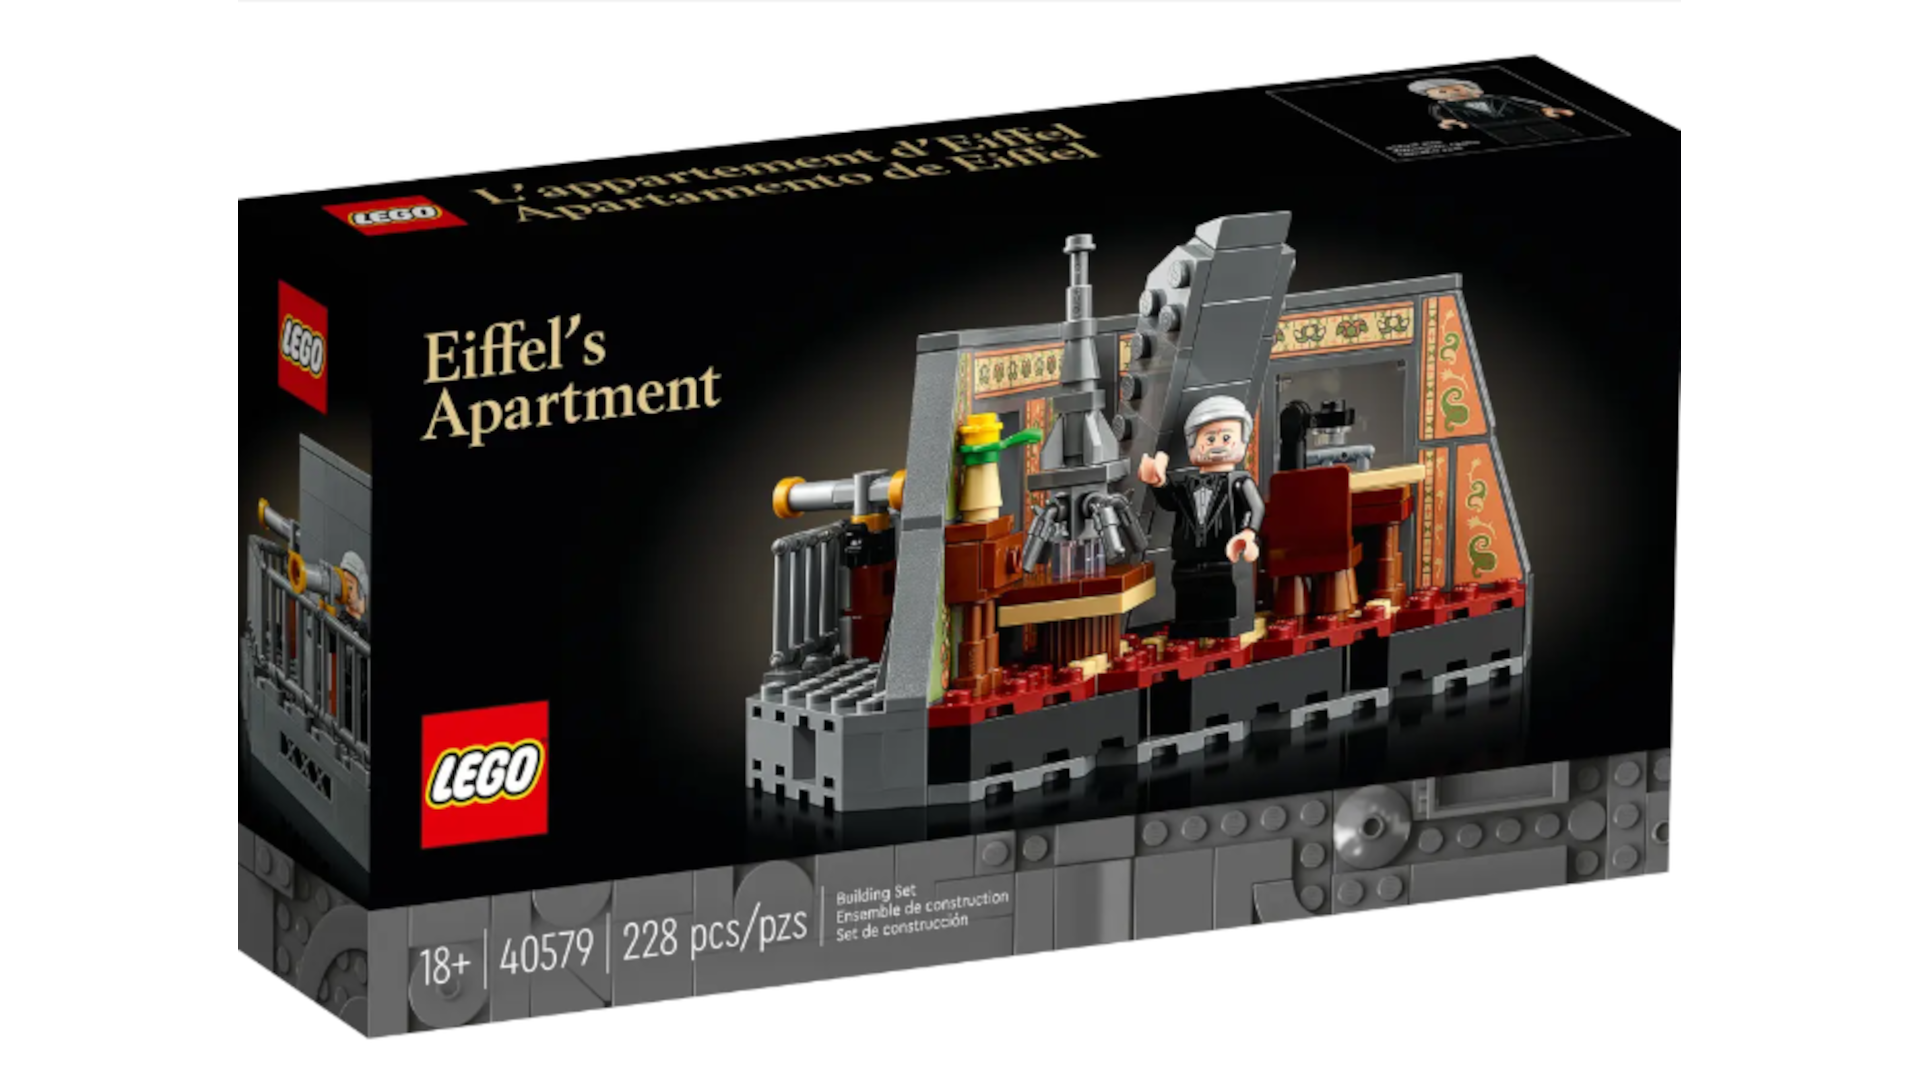 A LEGO box shows a picture of the Eiffel's Apartment set.